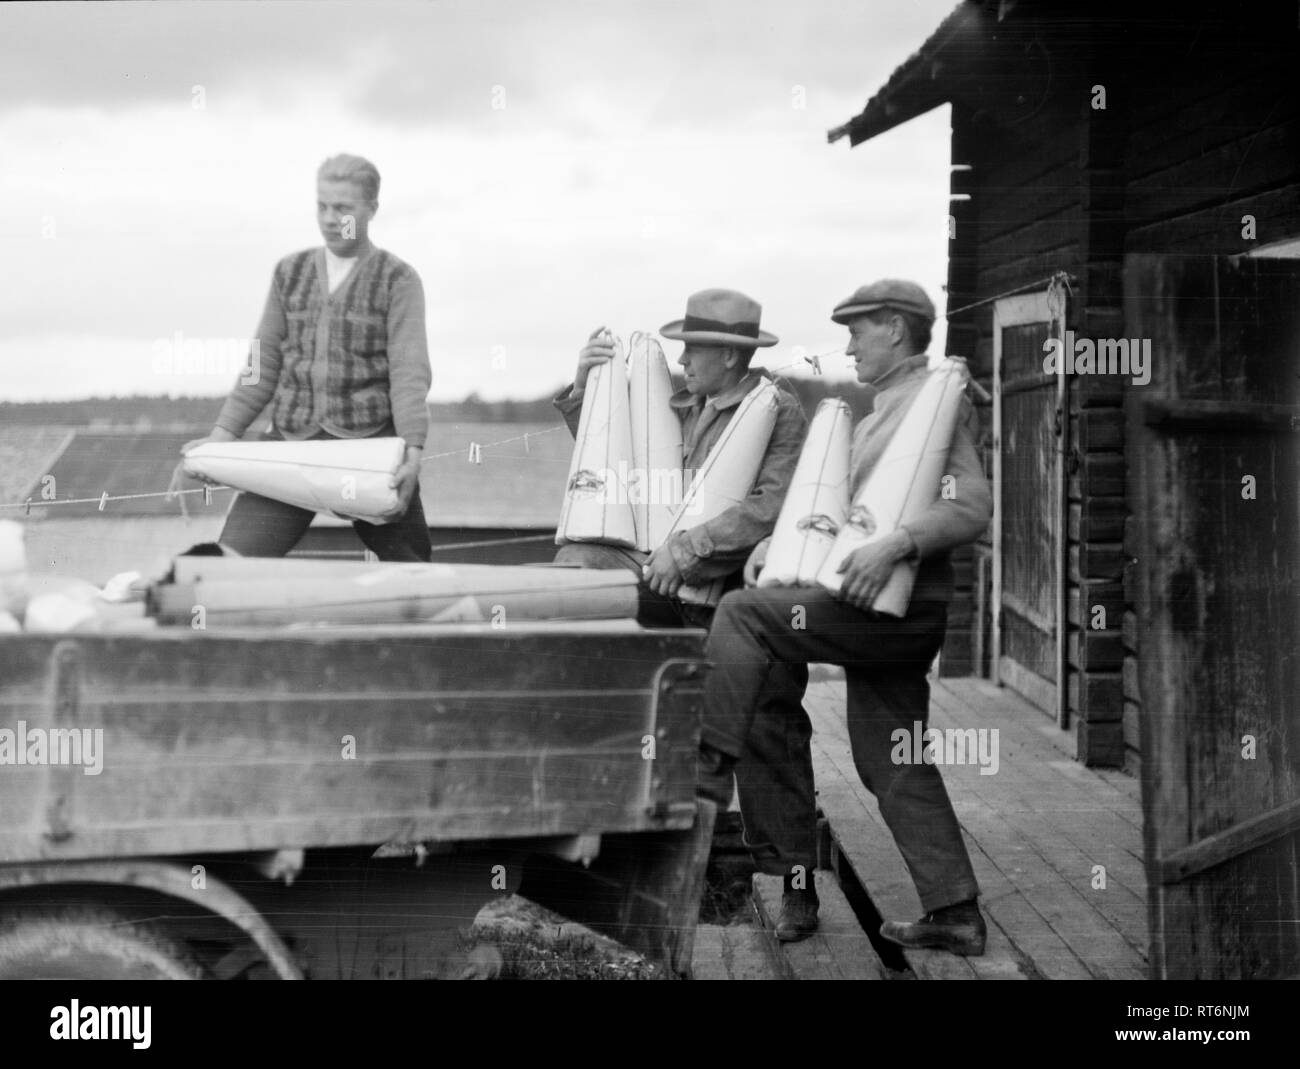 Finland History - Employees of Keitele Cooperative Store loading sugar loaves on to a lorry. ca. 1930s or 1940s Keitele, Pohjois-Savo, Finland Stock Photo